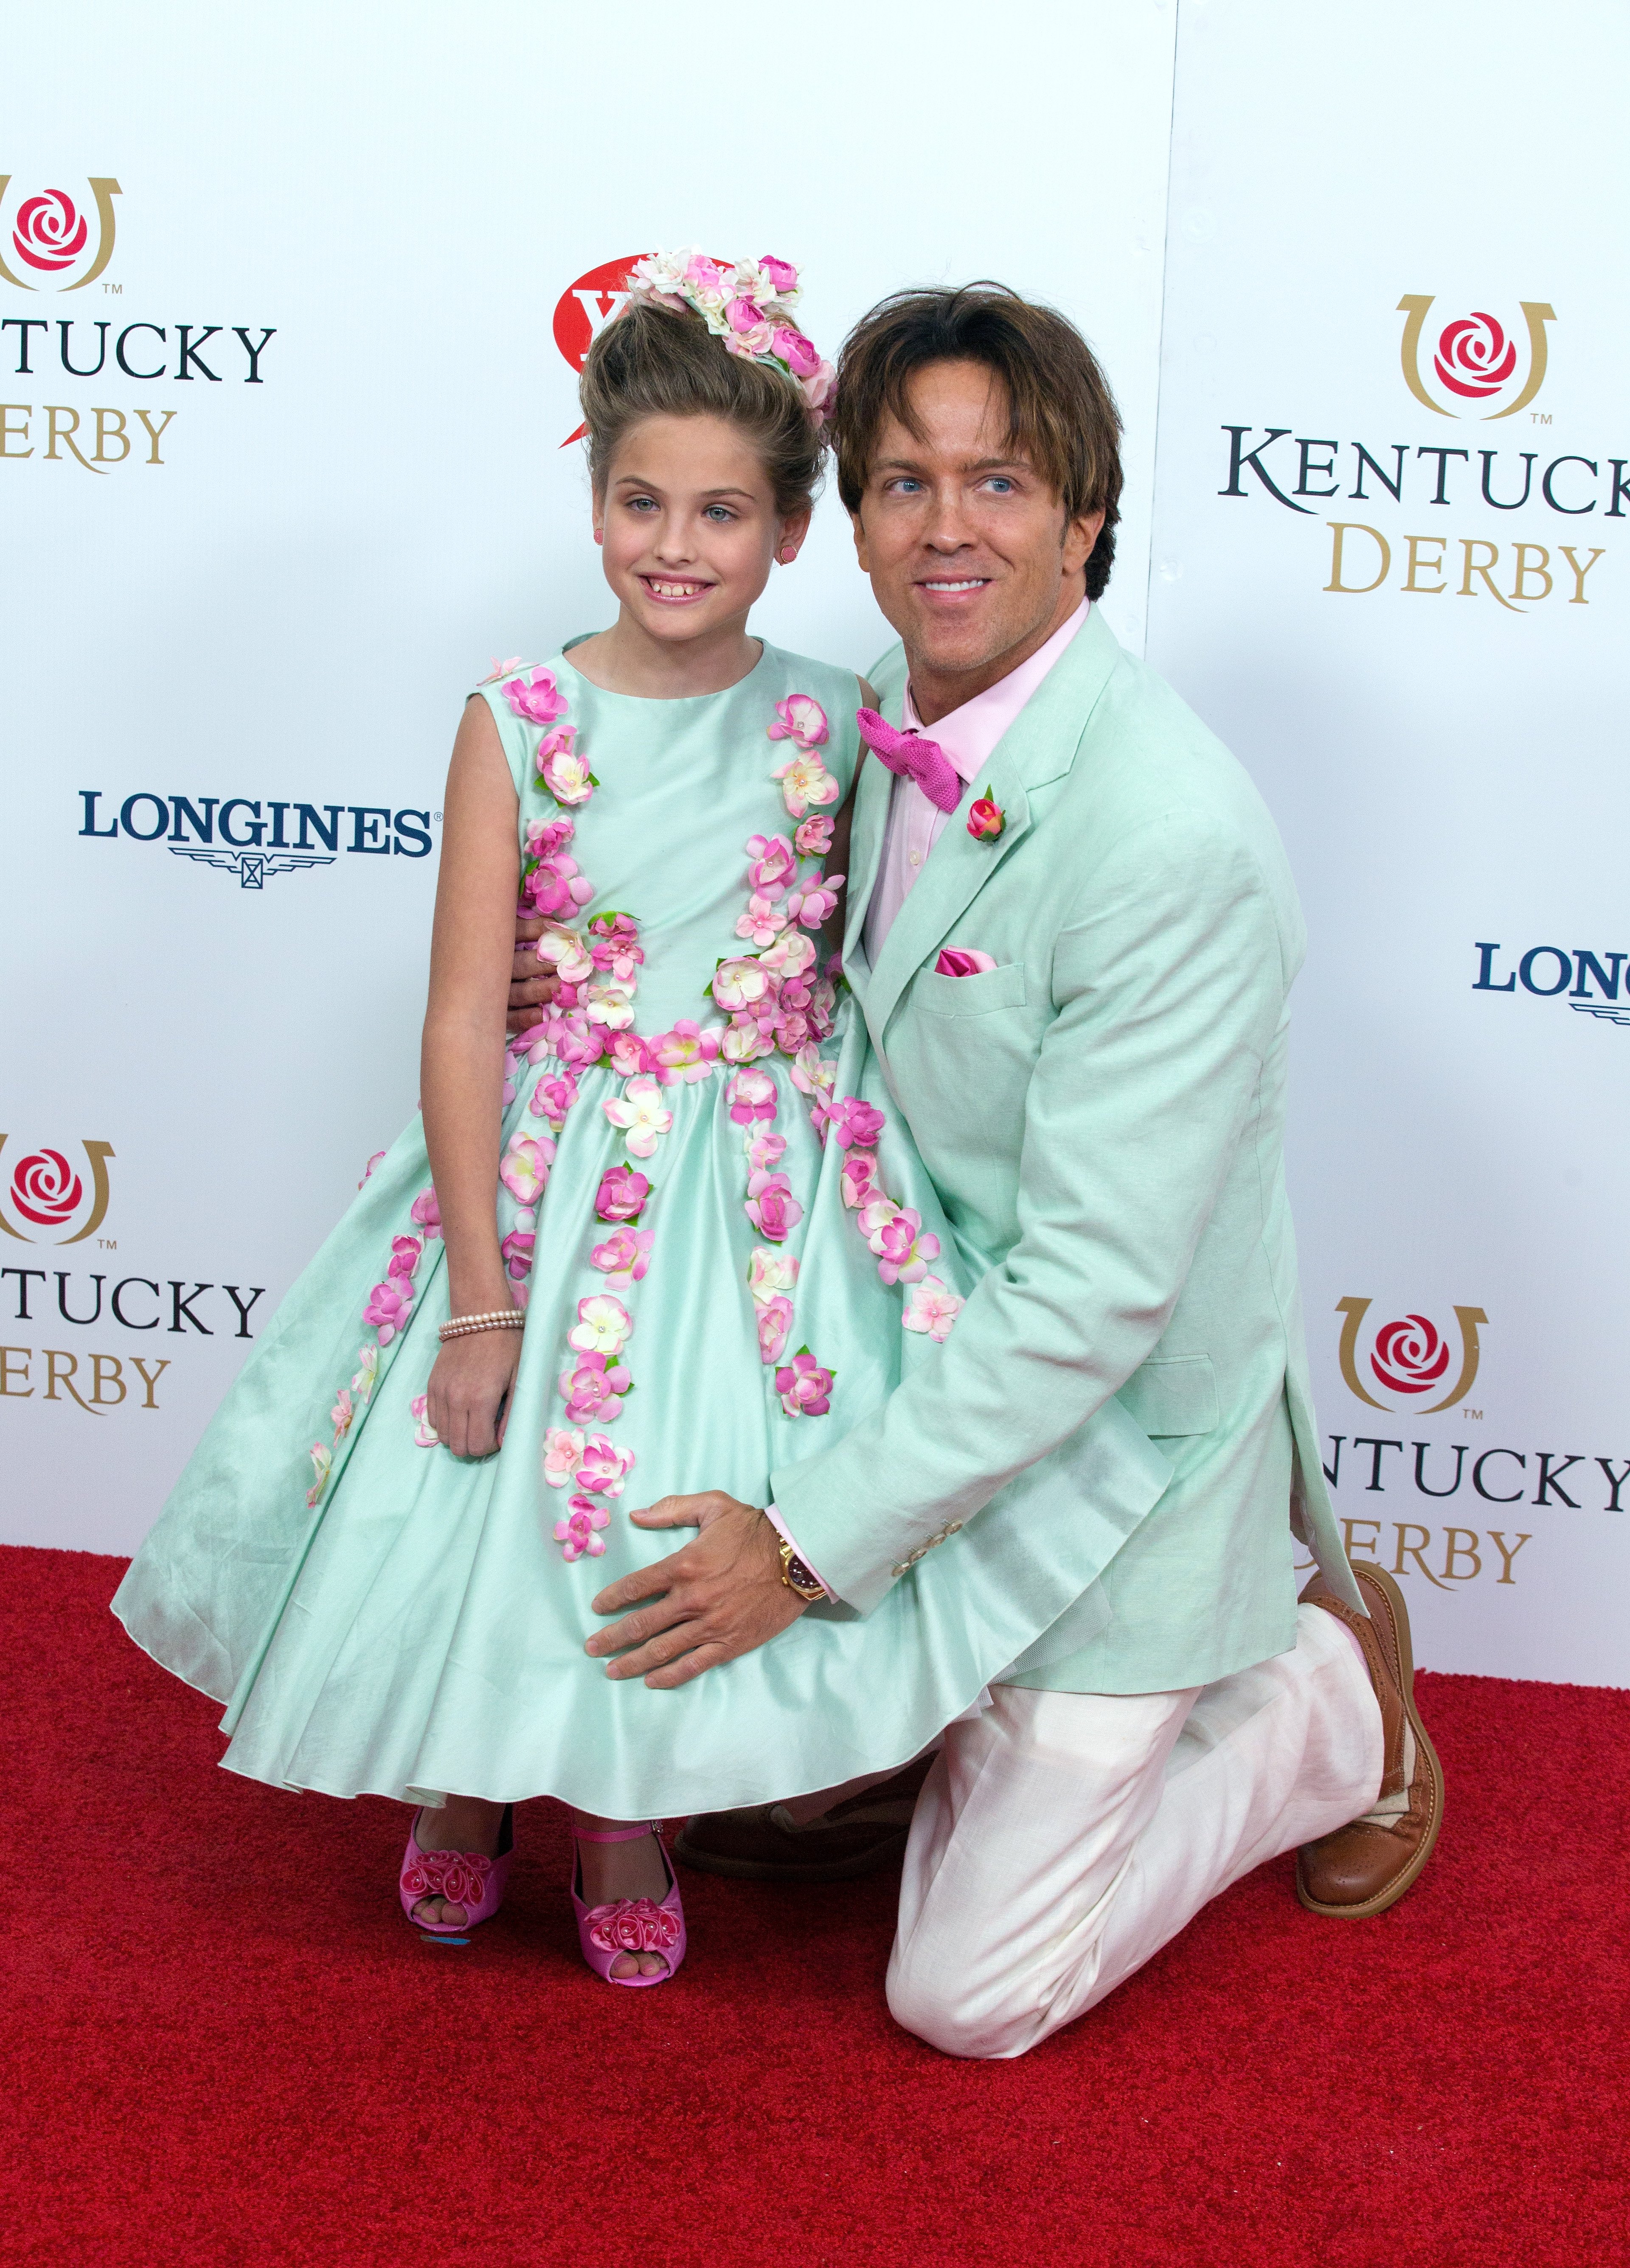 Dannielynn Birkhead and Larry Birkhead at the 142nd Kentucky Derby on May 07, 2016 | Source: Getty Images